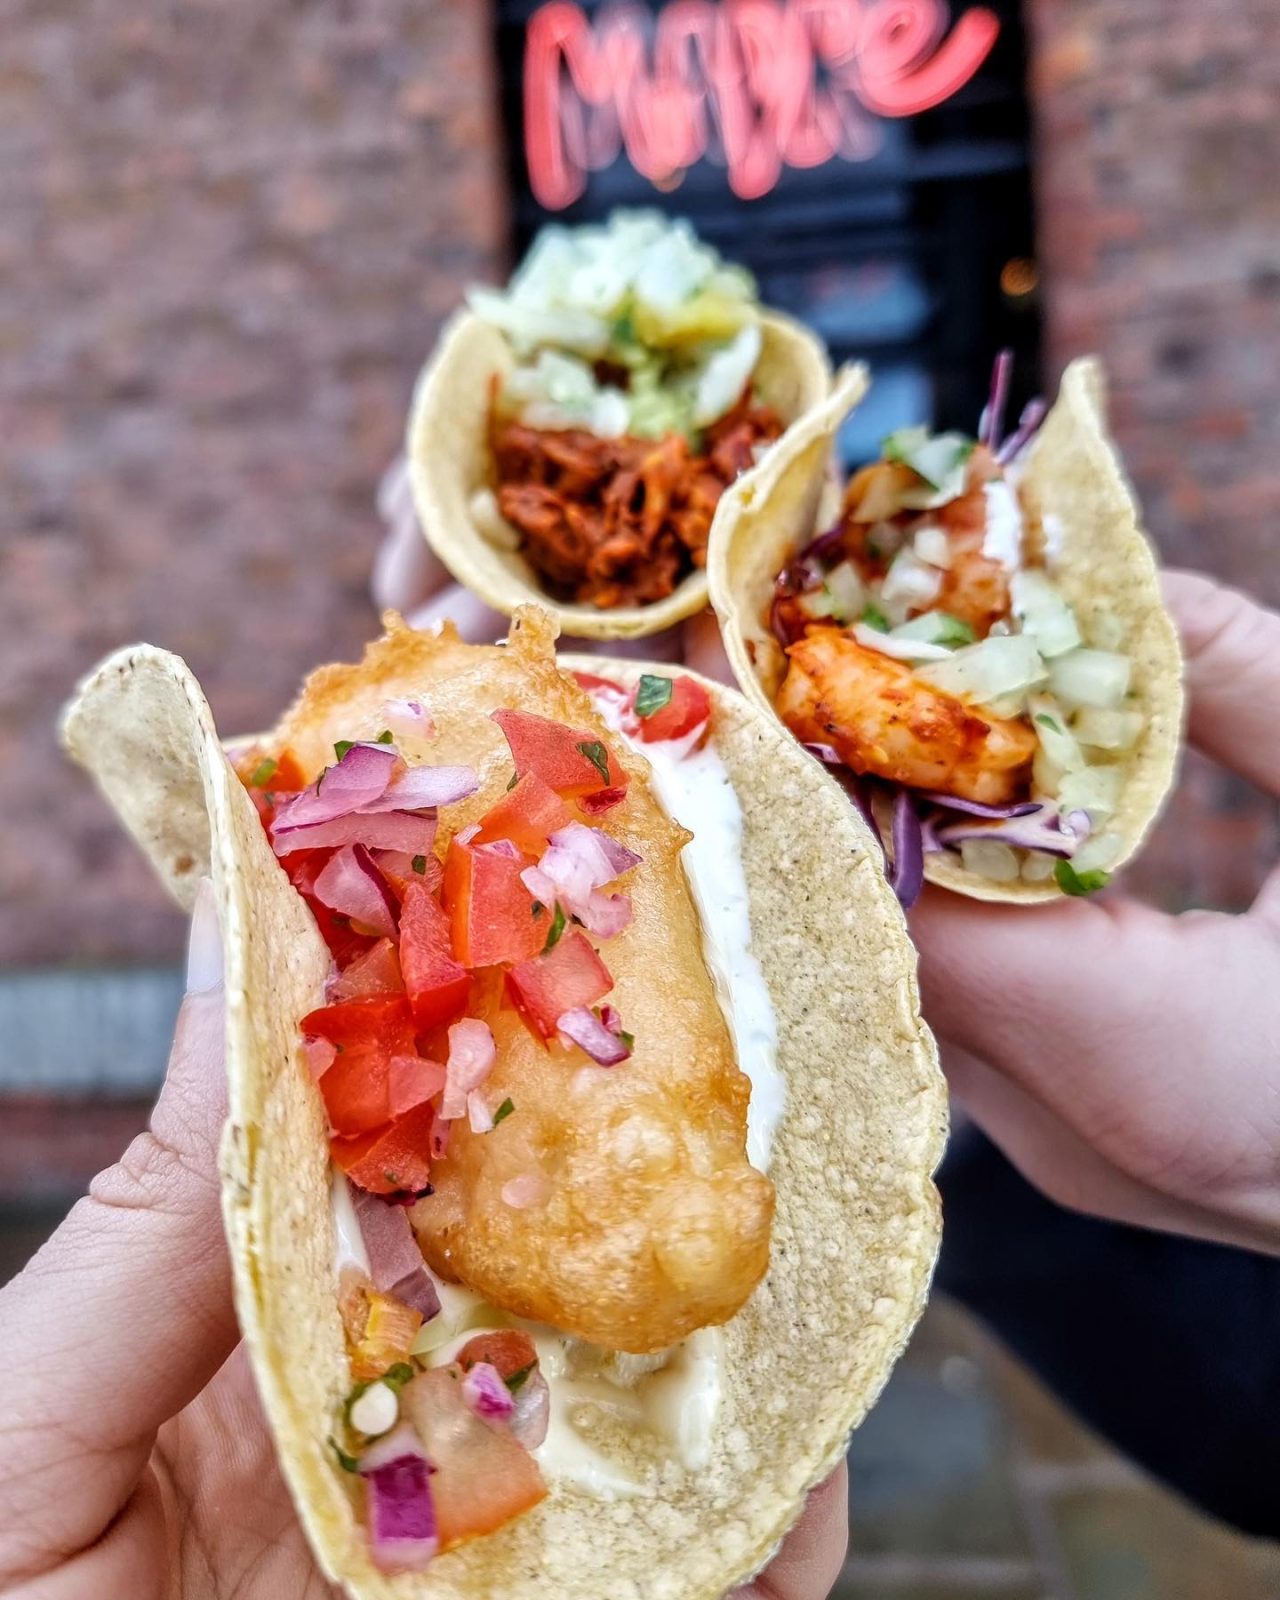 A Mexican restaurant selling gravy tacos is coming to Manchester, The Manc